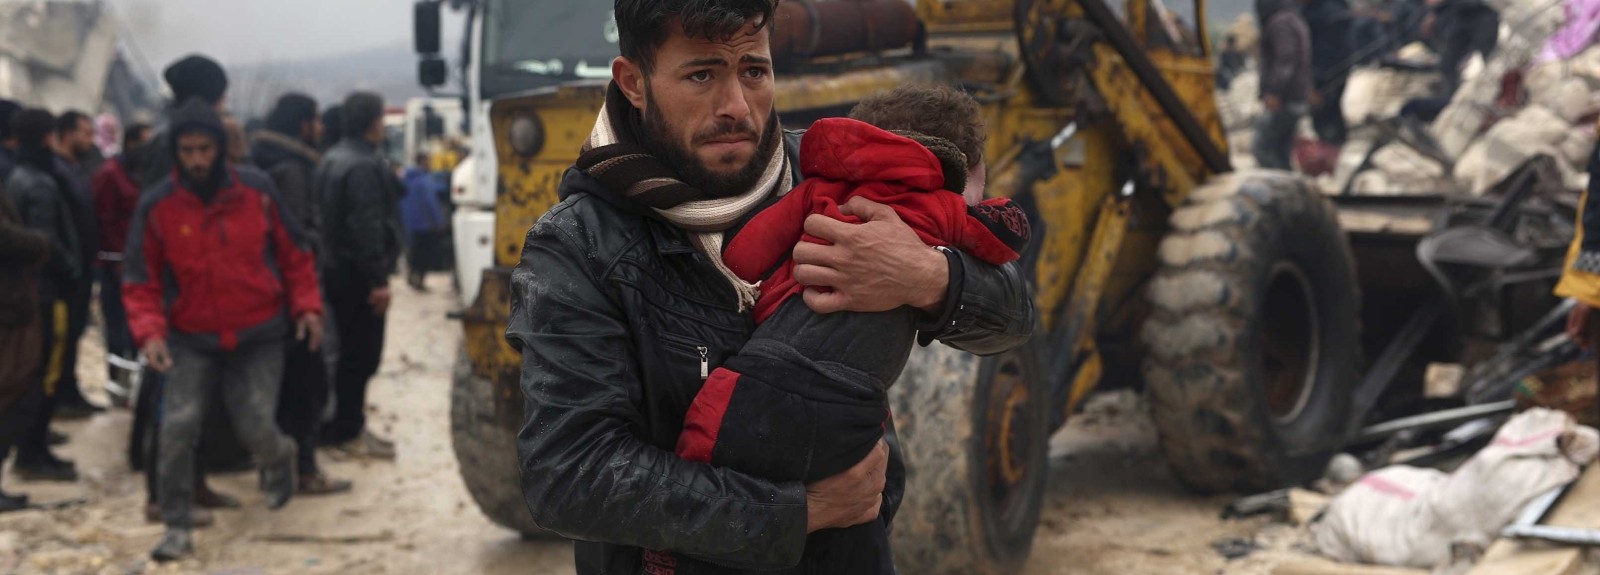 A man carries a child from wreckage after earthquake in Turkey